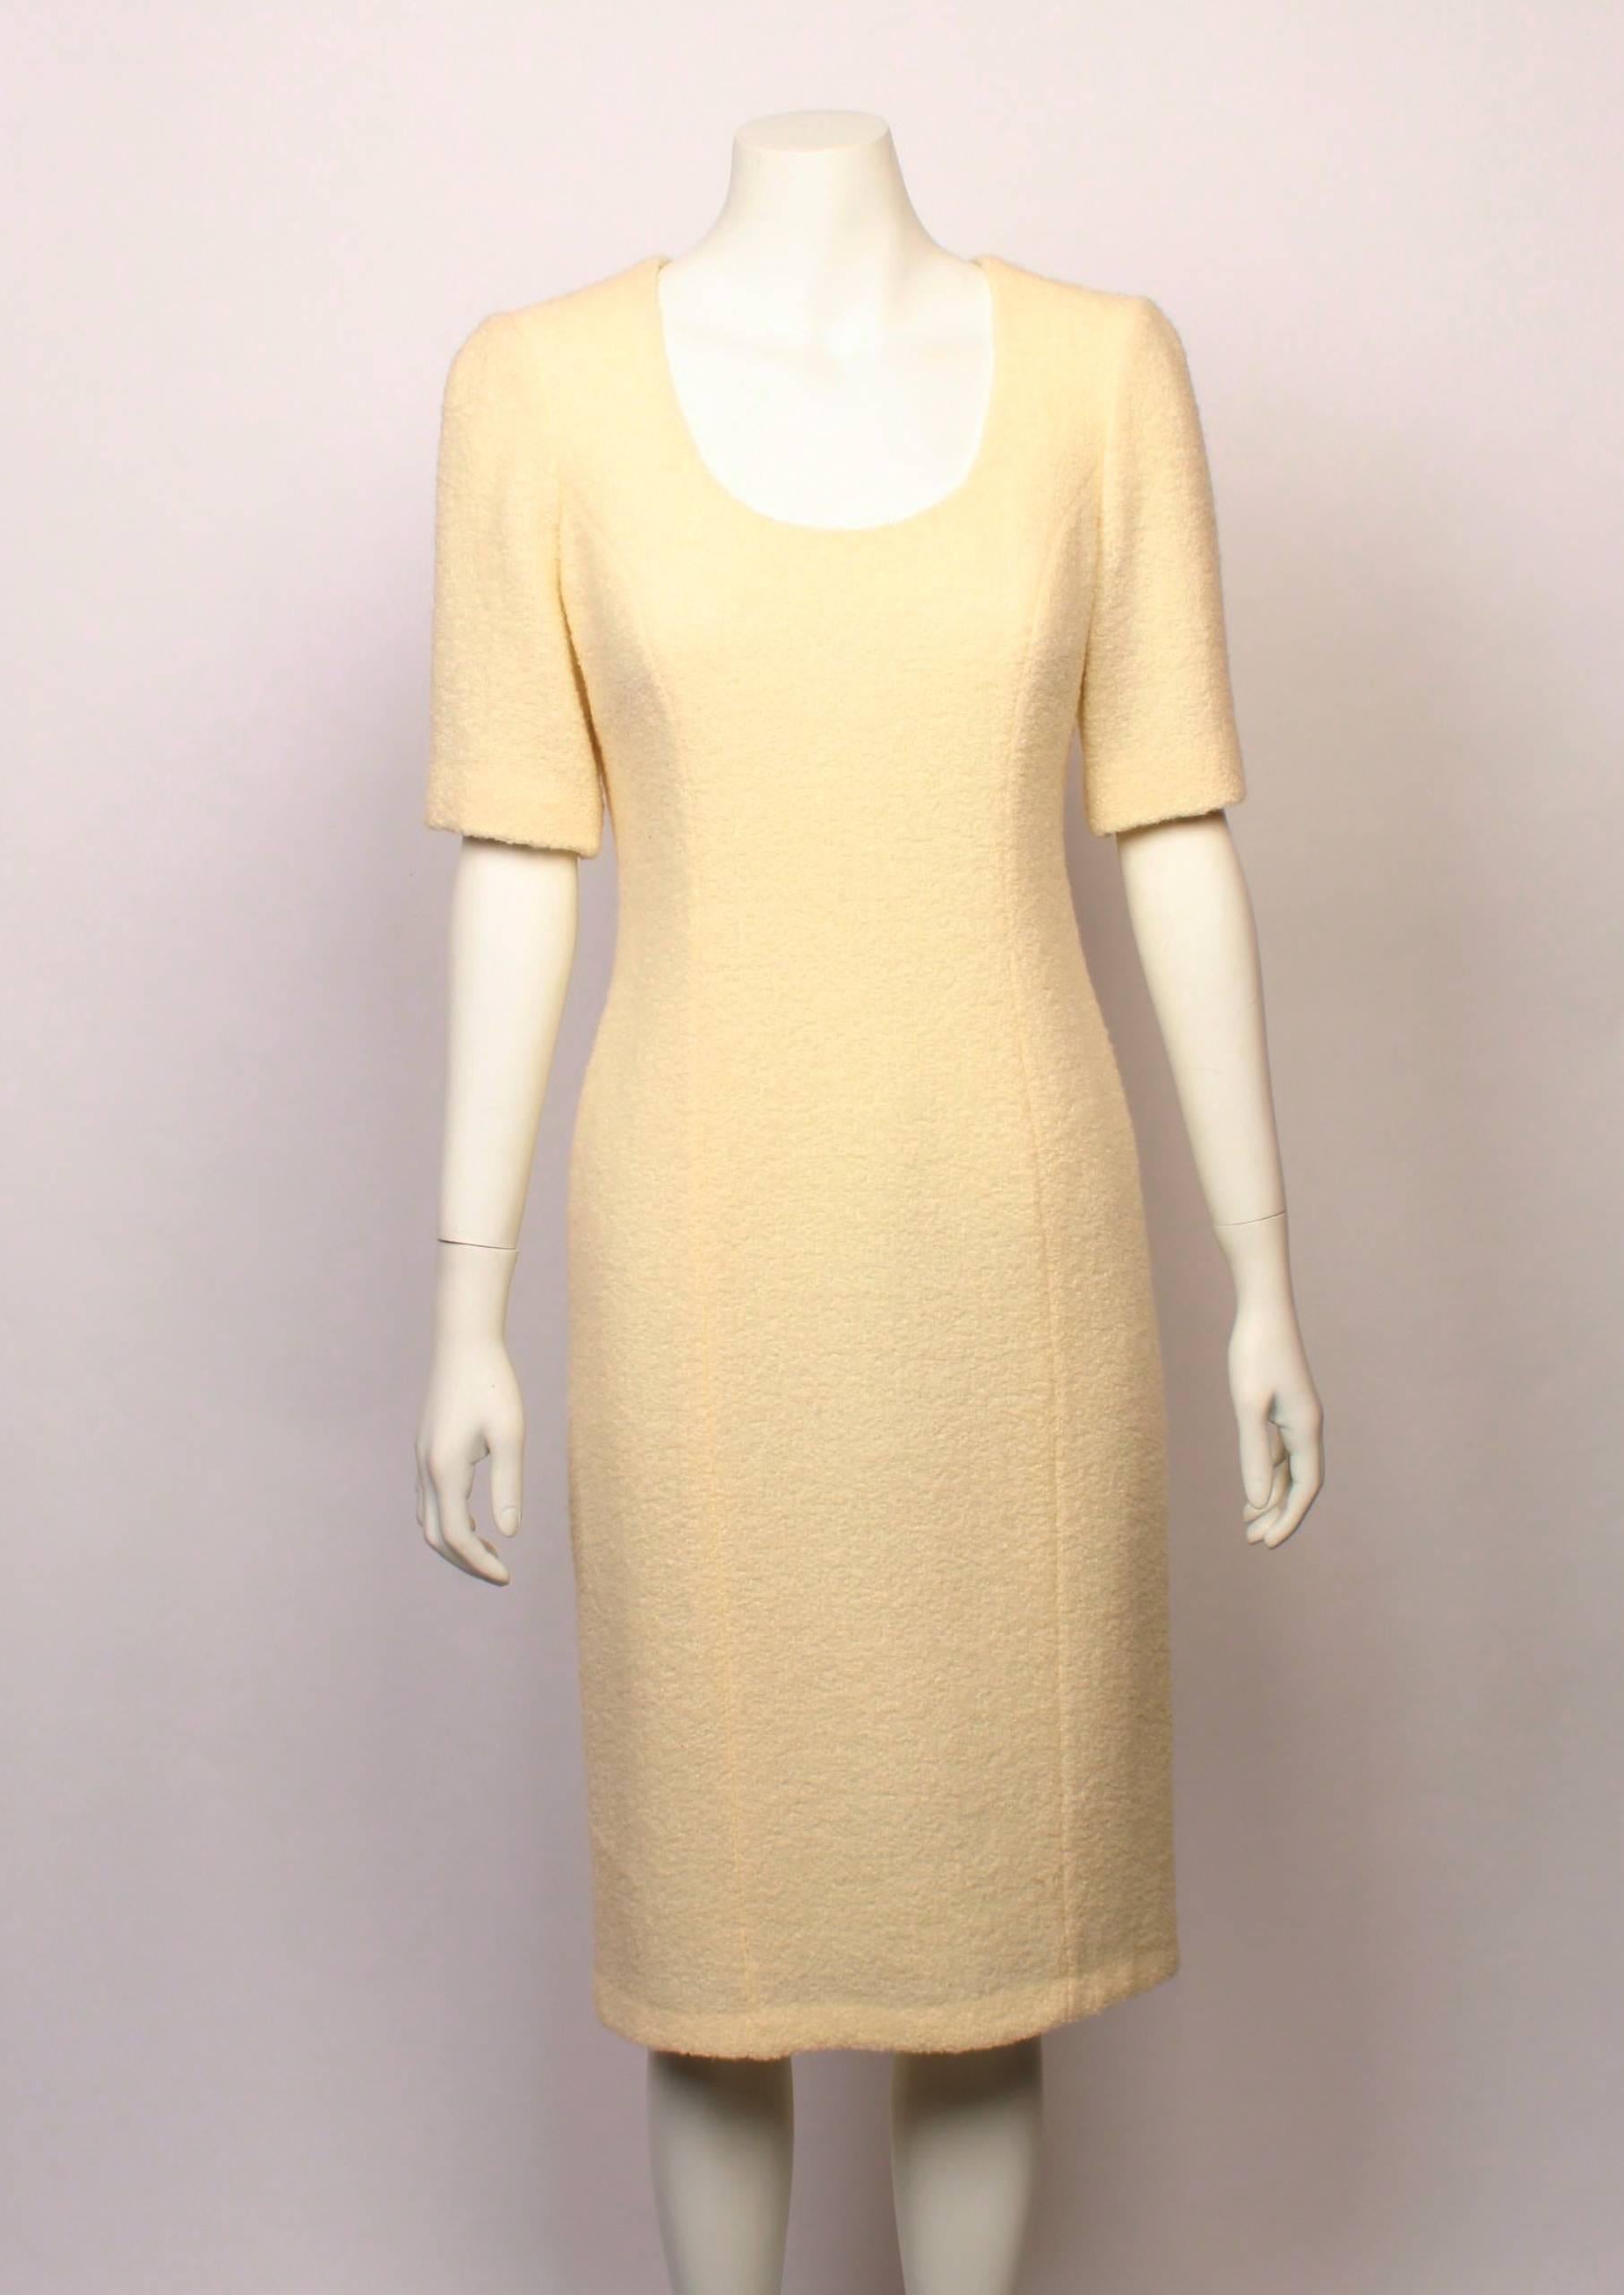 Moschino Cheap And Chic Ivory Wool Boucle' Shift Dress In Good Condition For Sale In Melbourne, Victoria